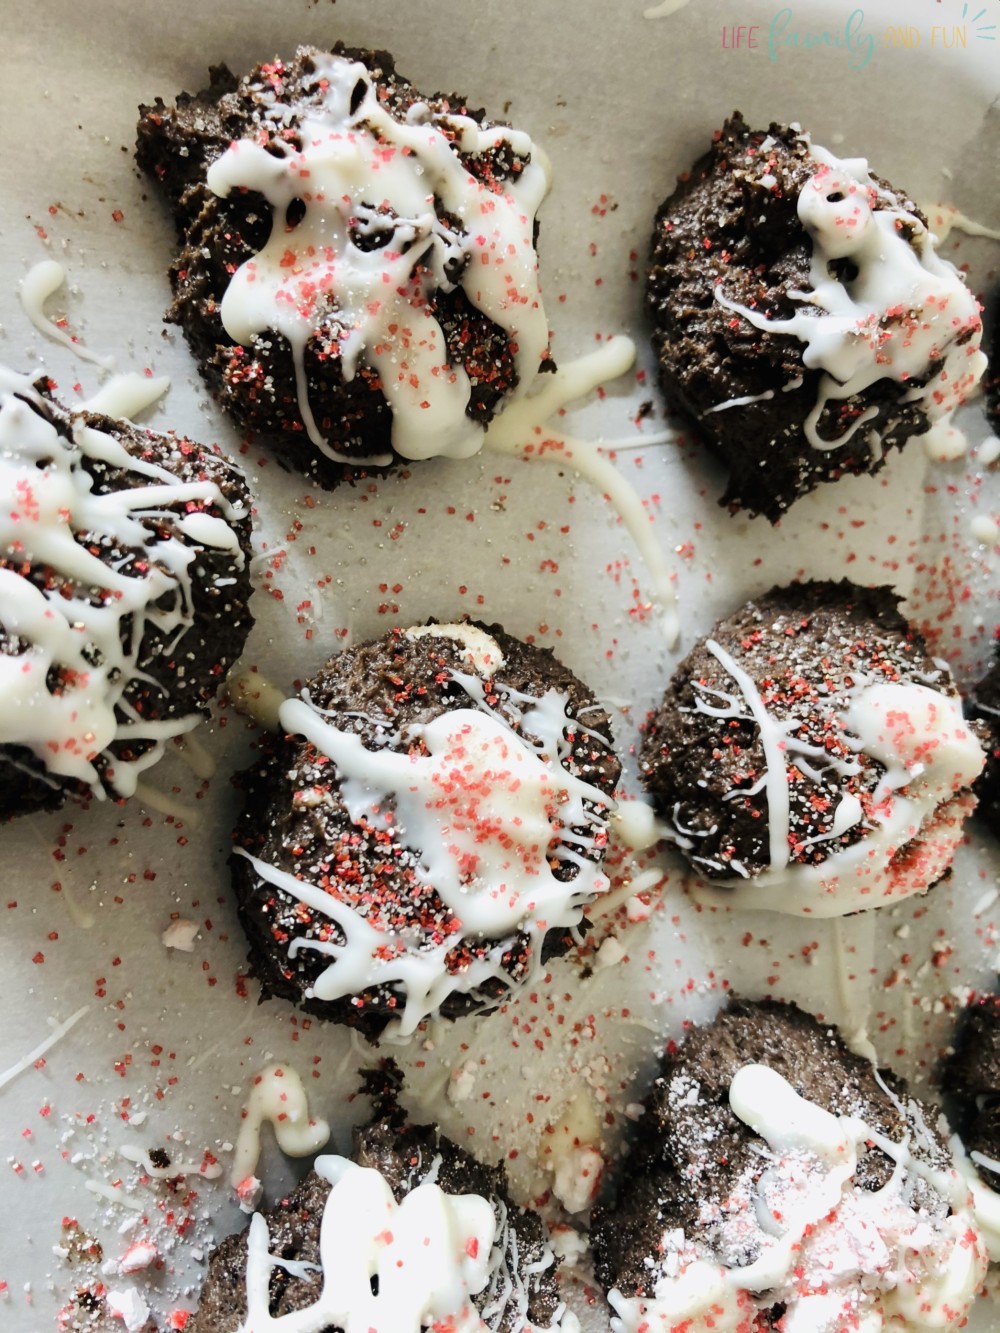 What pairs well with Oreo Truffles?